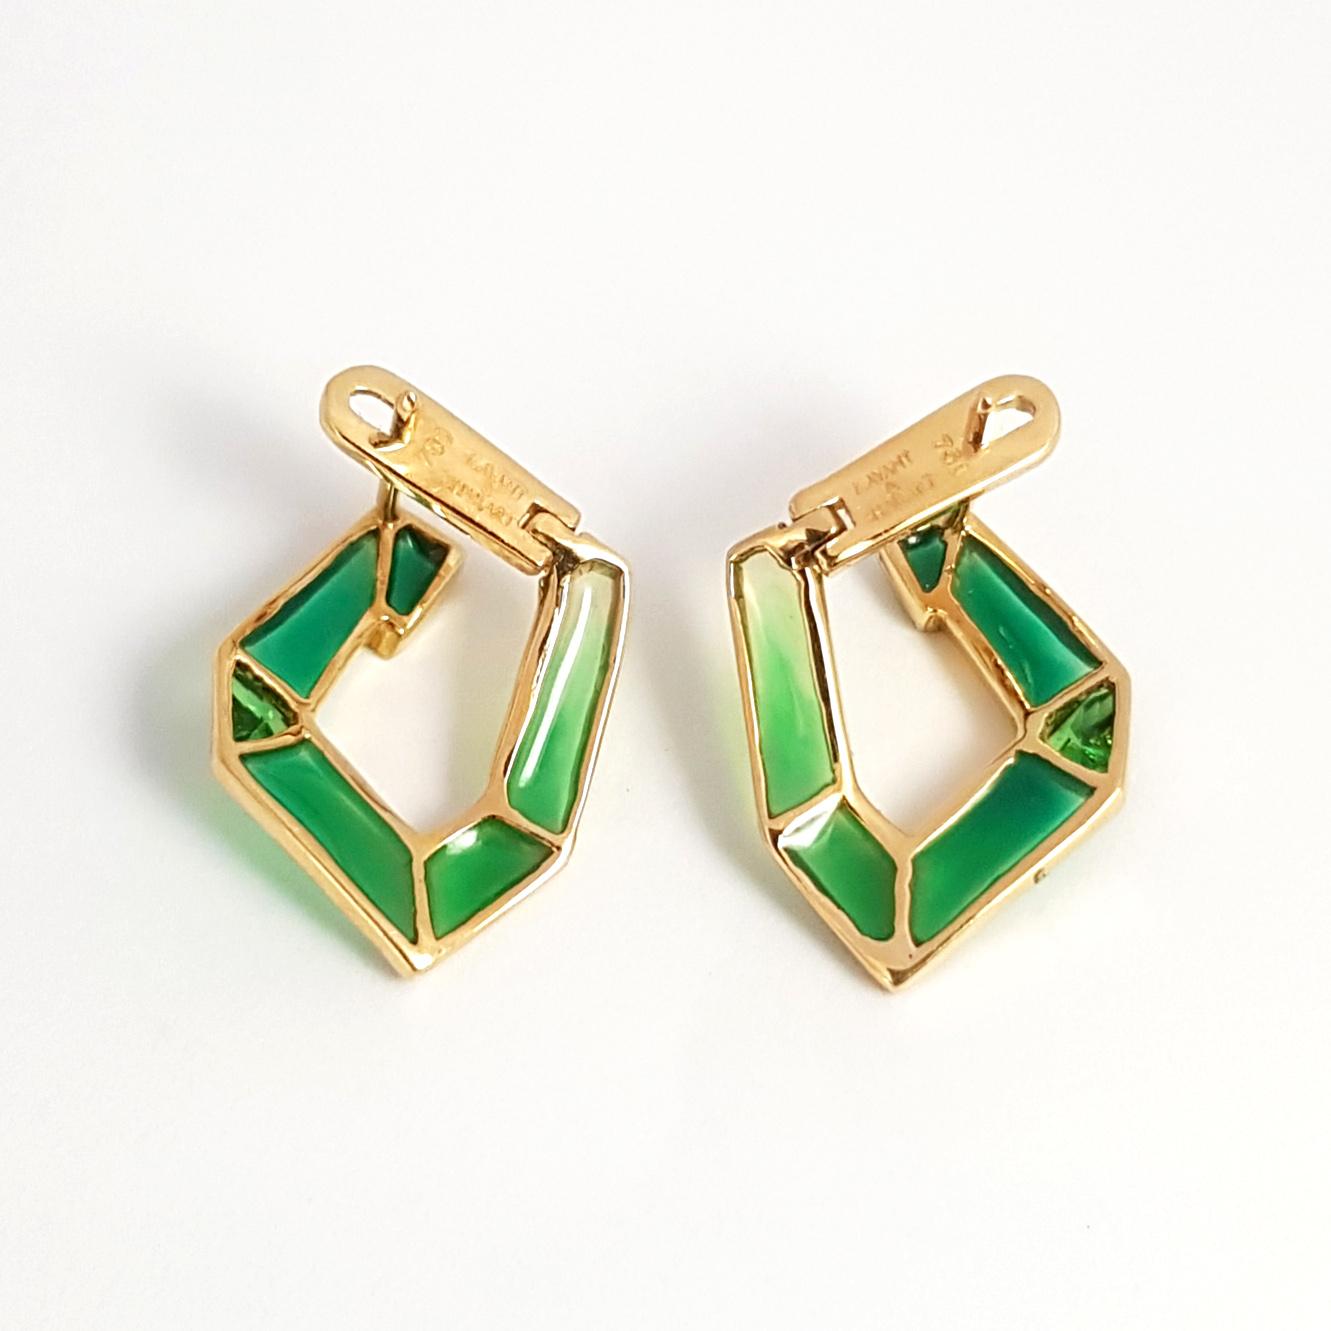 Origami Link No. 5 Tsavorite with Enamel Earrings 18K Yellow Gold Petite For Sale 3